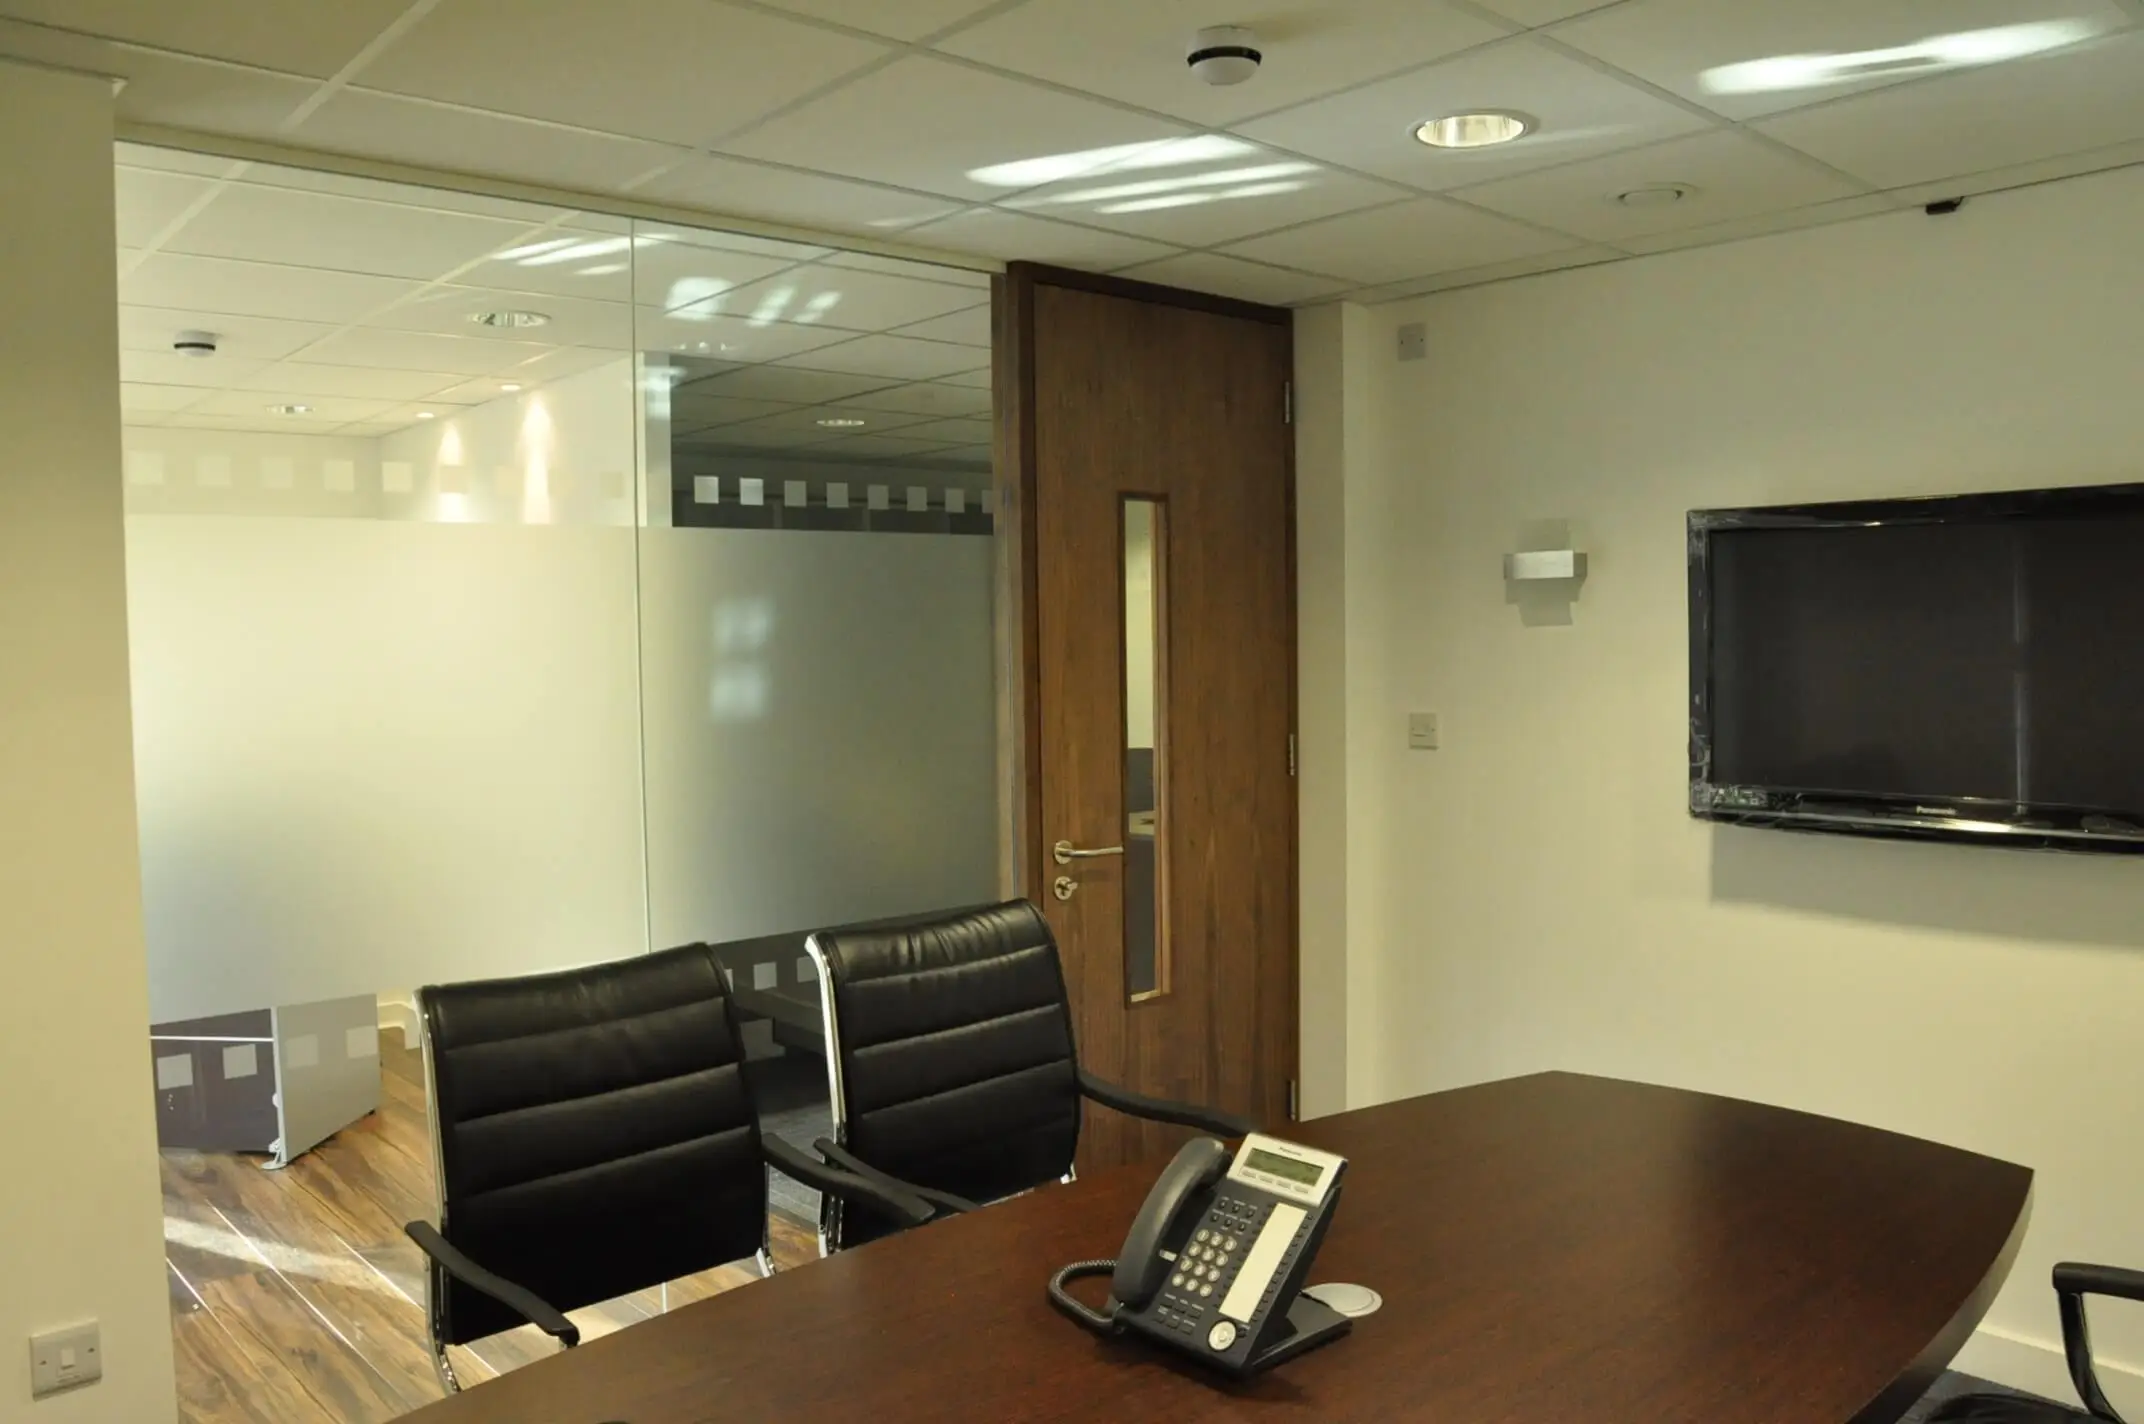 Small meeting room glass parttions with solid doors and manifestation